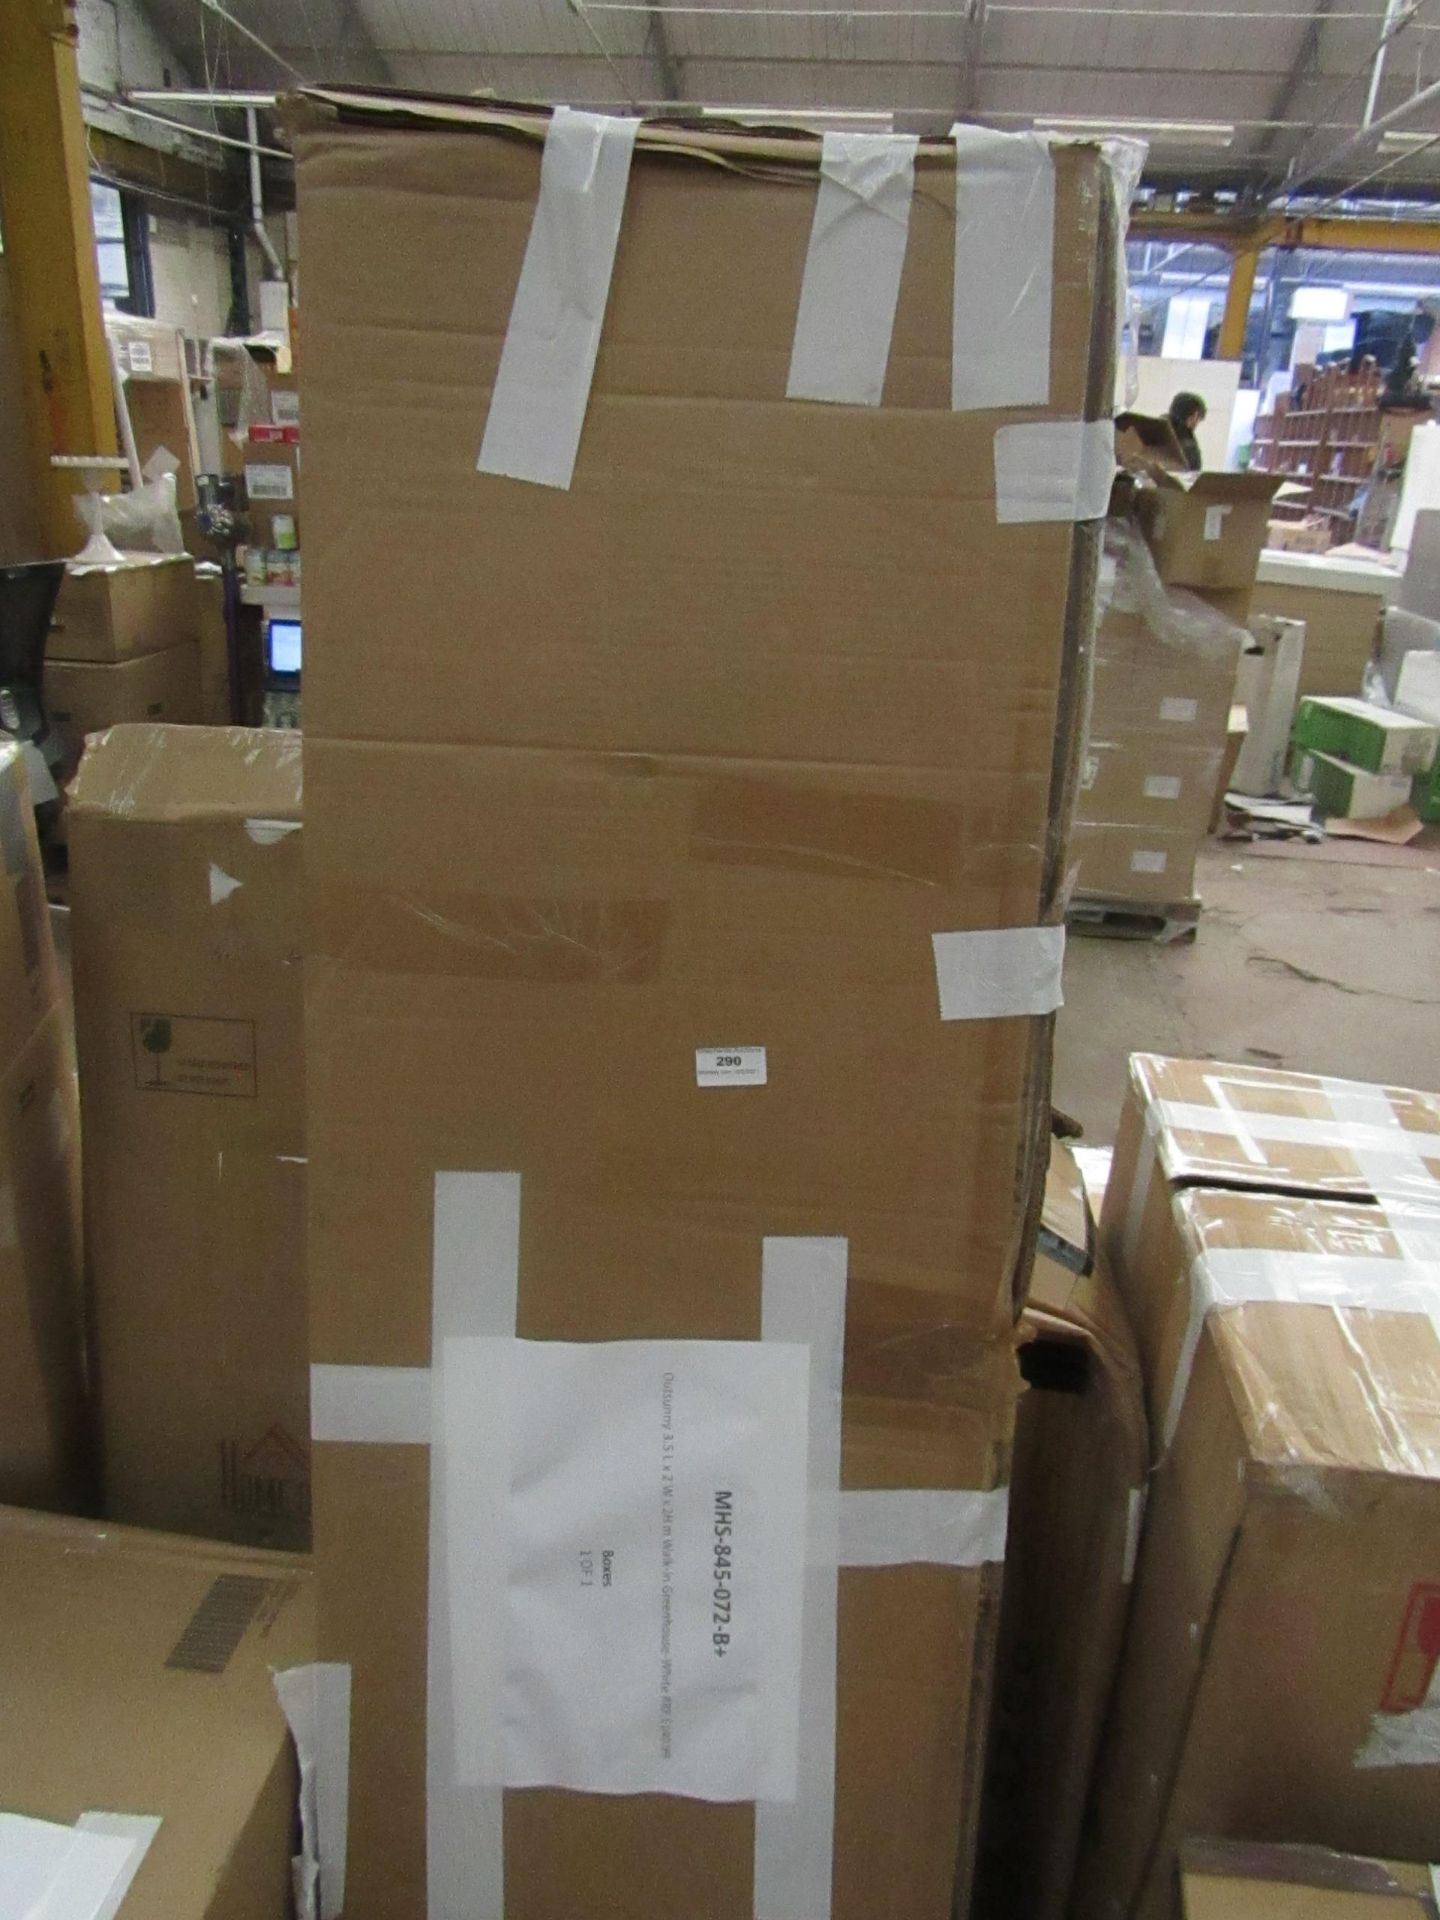 | 1x | OUTSUNNY 3.5L X 2W X 2H METRE WALK-IN GREENHOUSE WHITE | UNCHECKED & BOXED | SKU MHS-845- - Image 2 of 2